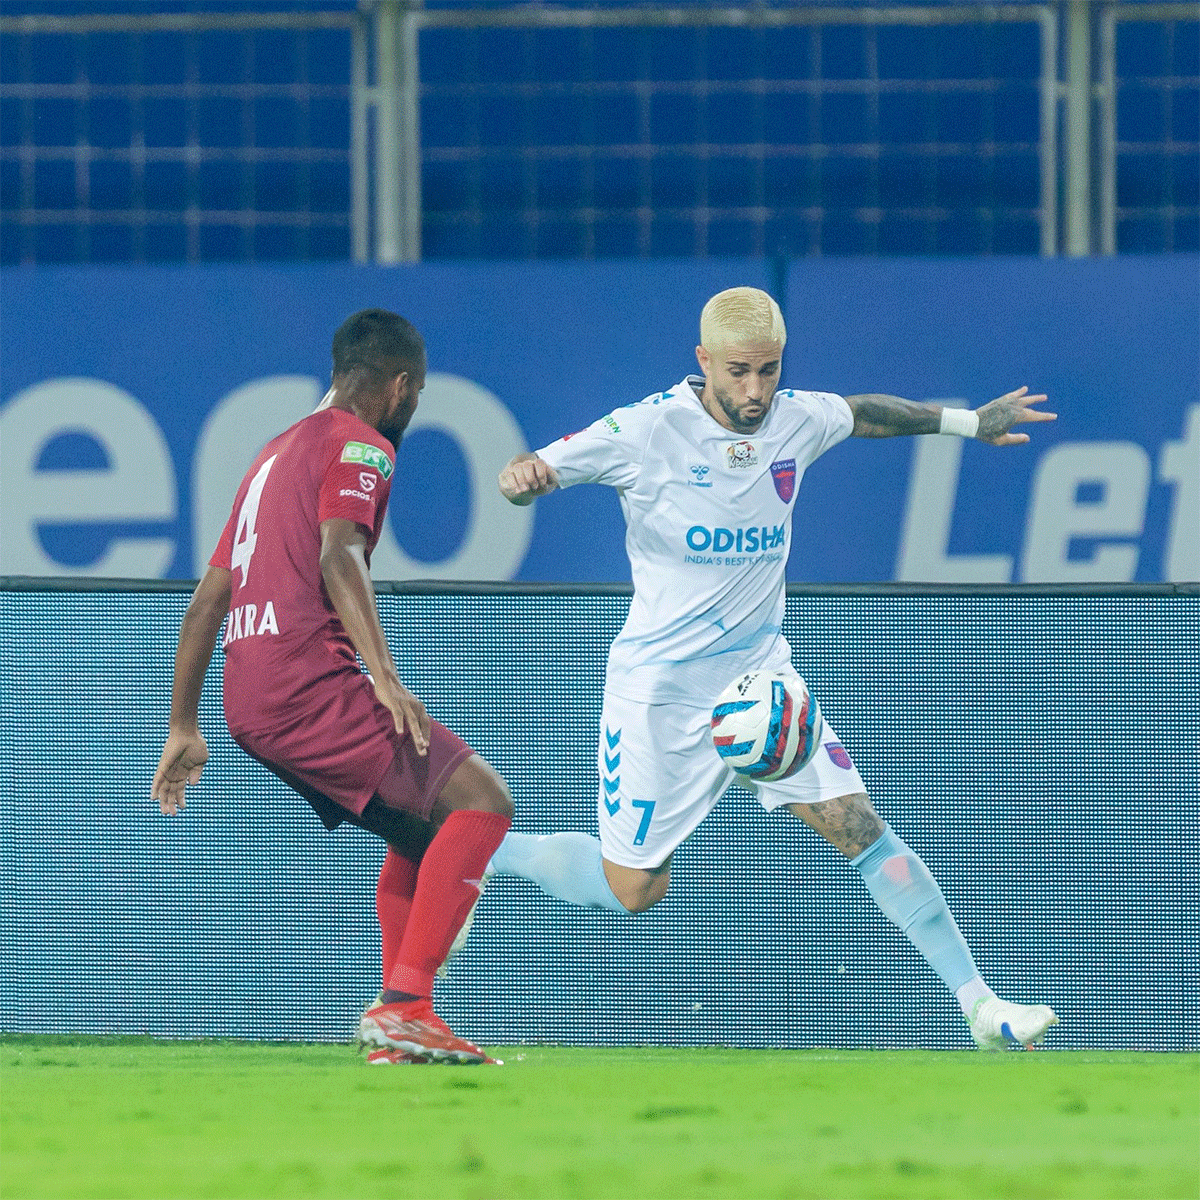 Odisha FC's Aridai Suarez (right) vies for possession during a match against NEUFC in Margao on Tuesday